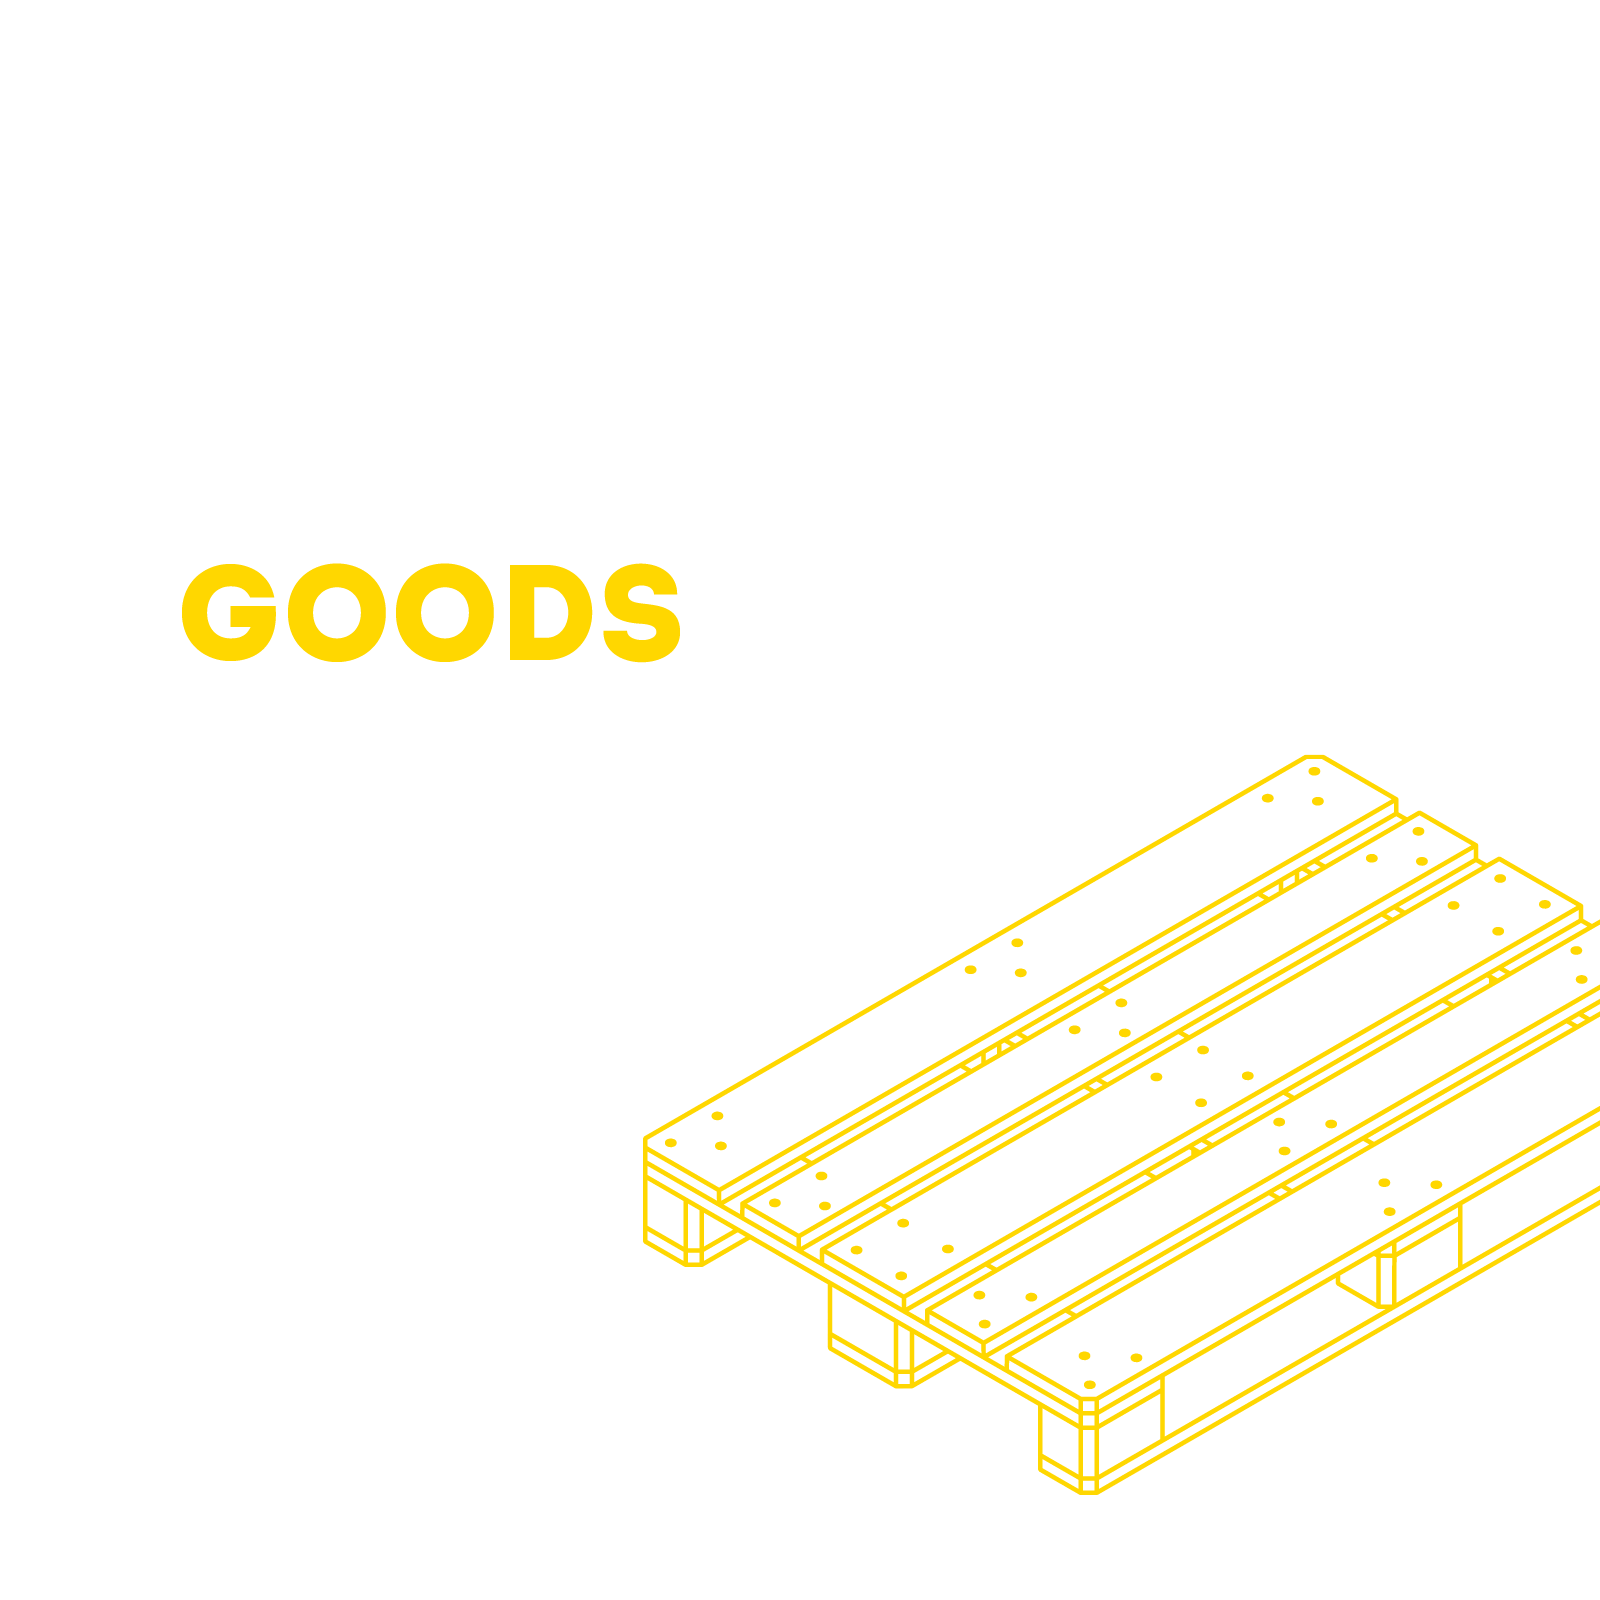 Get the goods moving